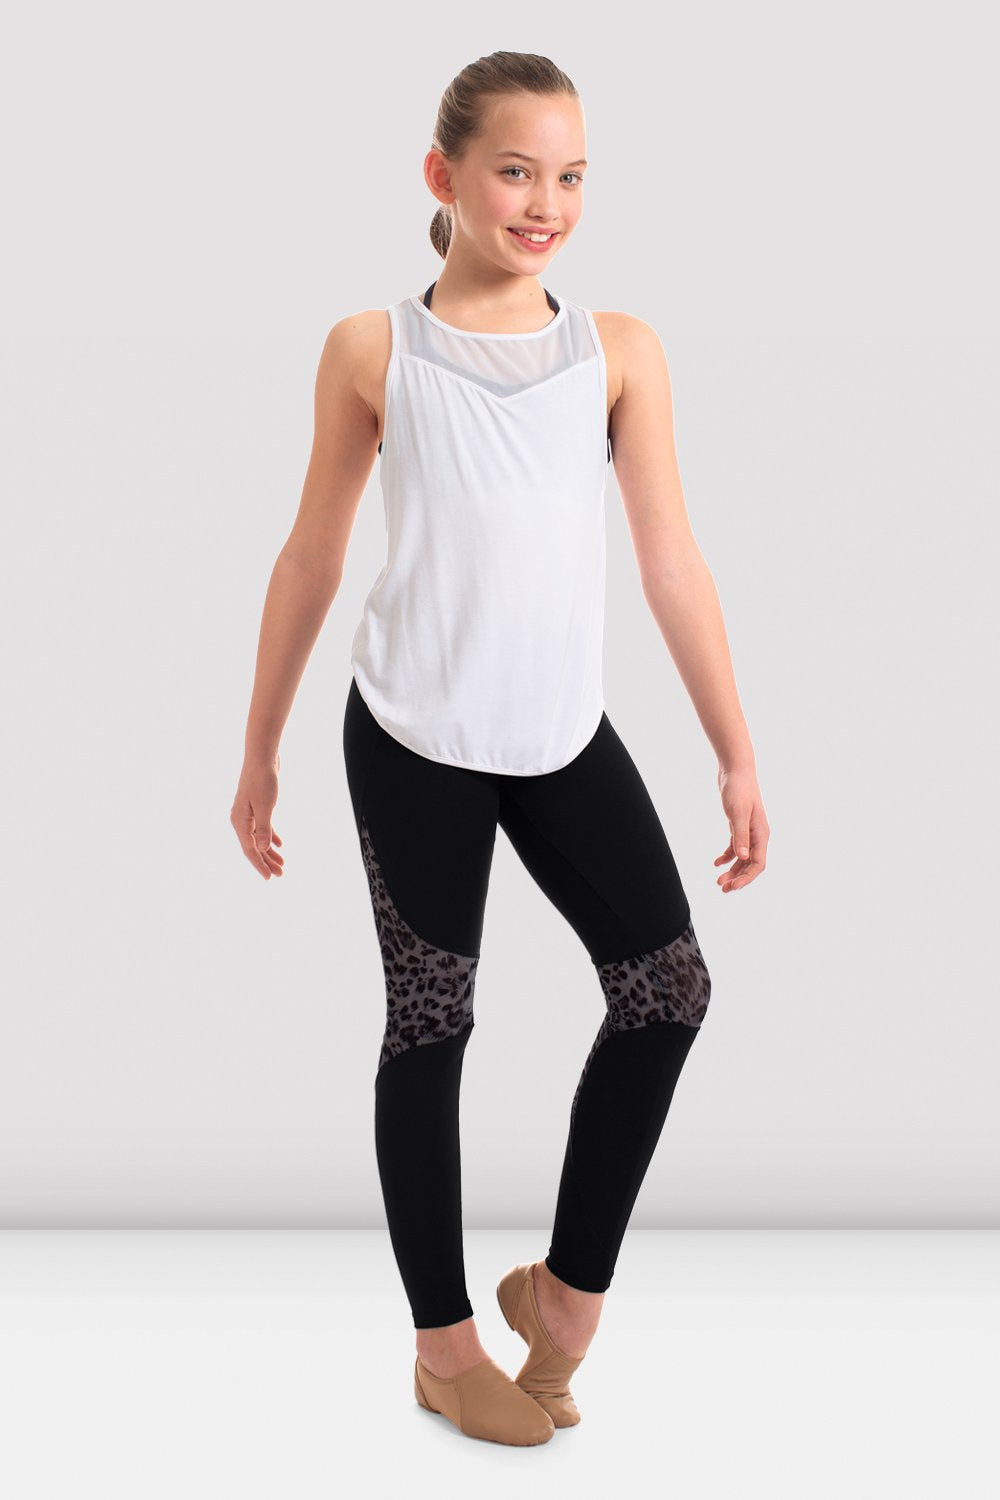 Ropa Deportiva Multiusos para Dama Nativos  Sport outfits, Workout  clothes, Athleisure outfits